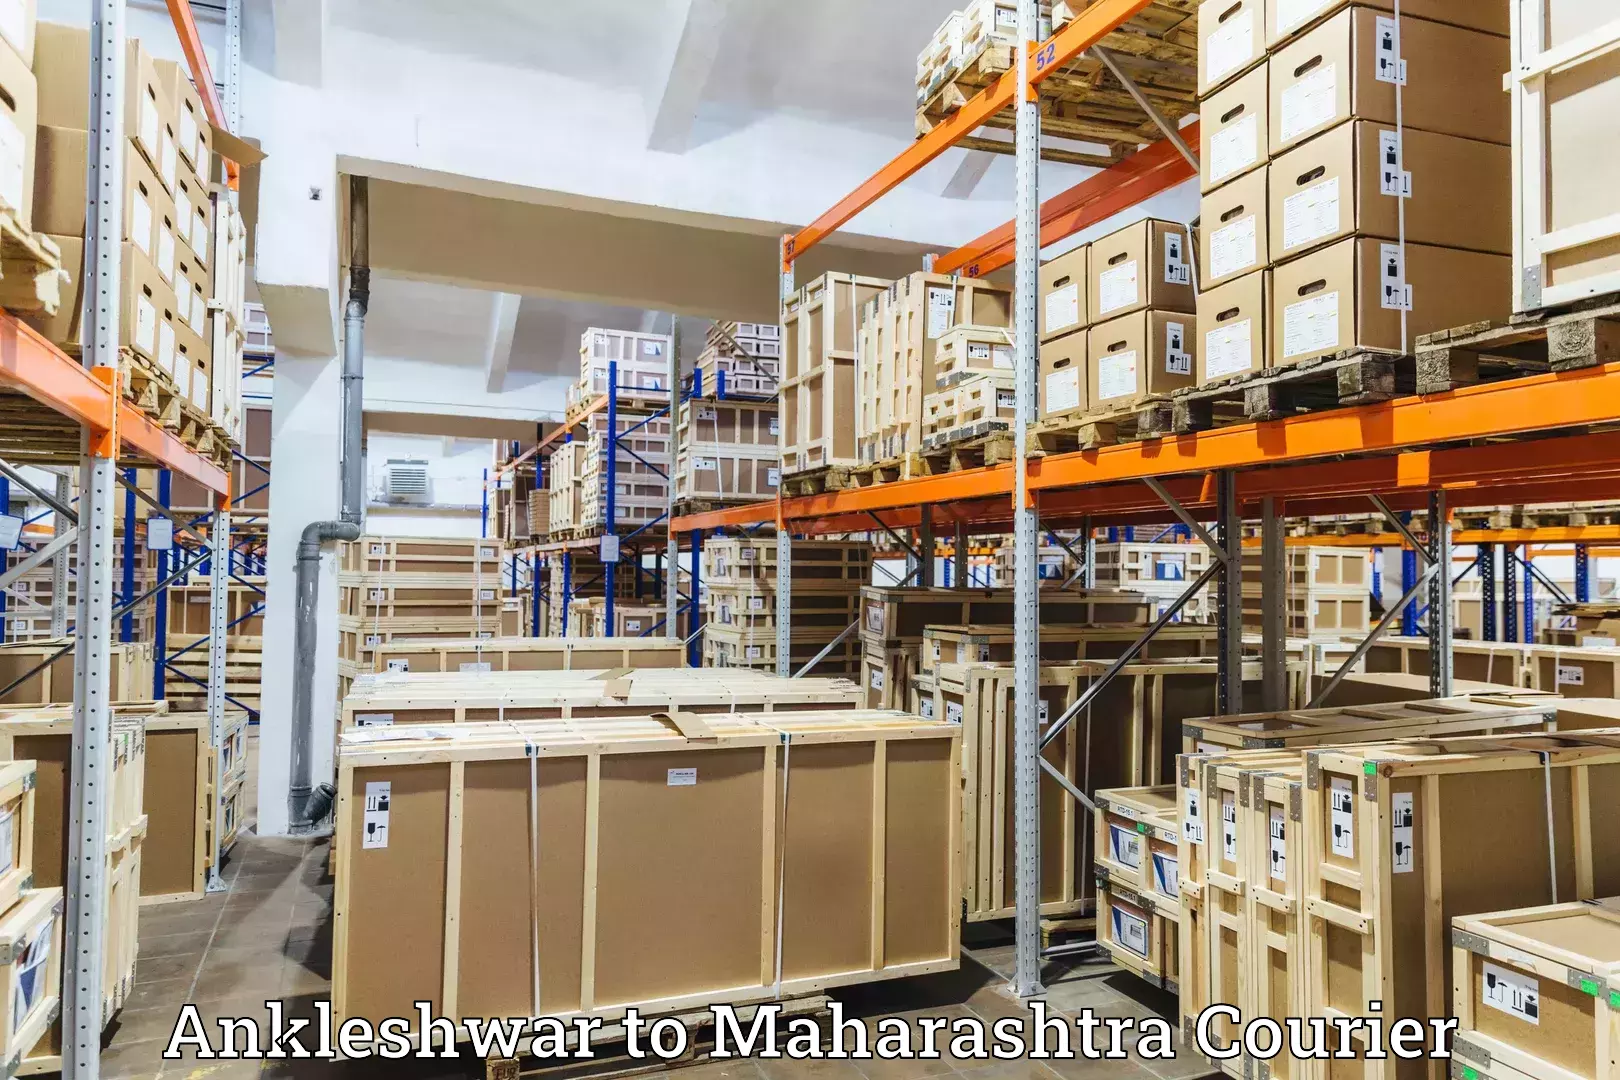 End-to-end delivery Ankleshwar to Mumbai Port